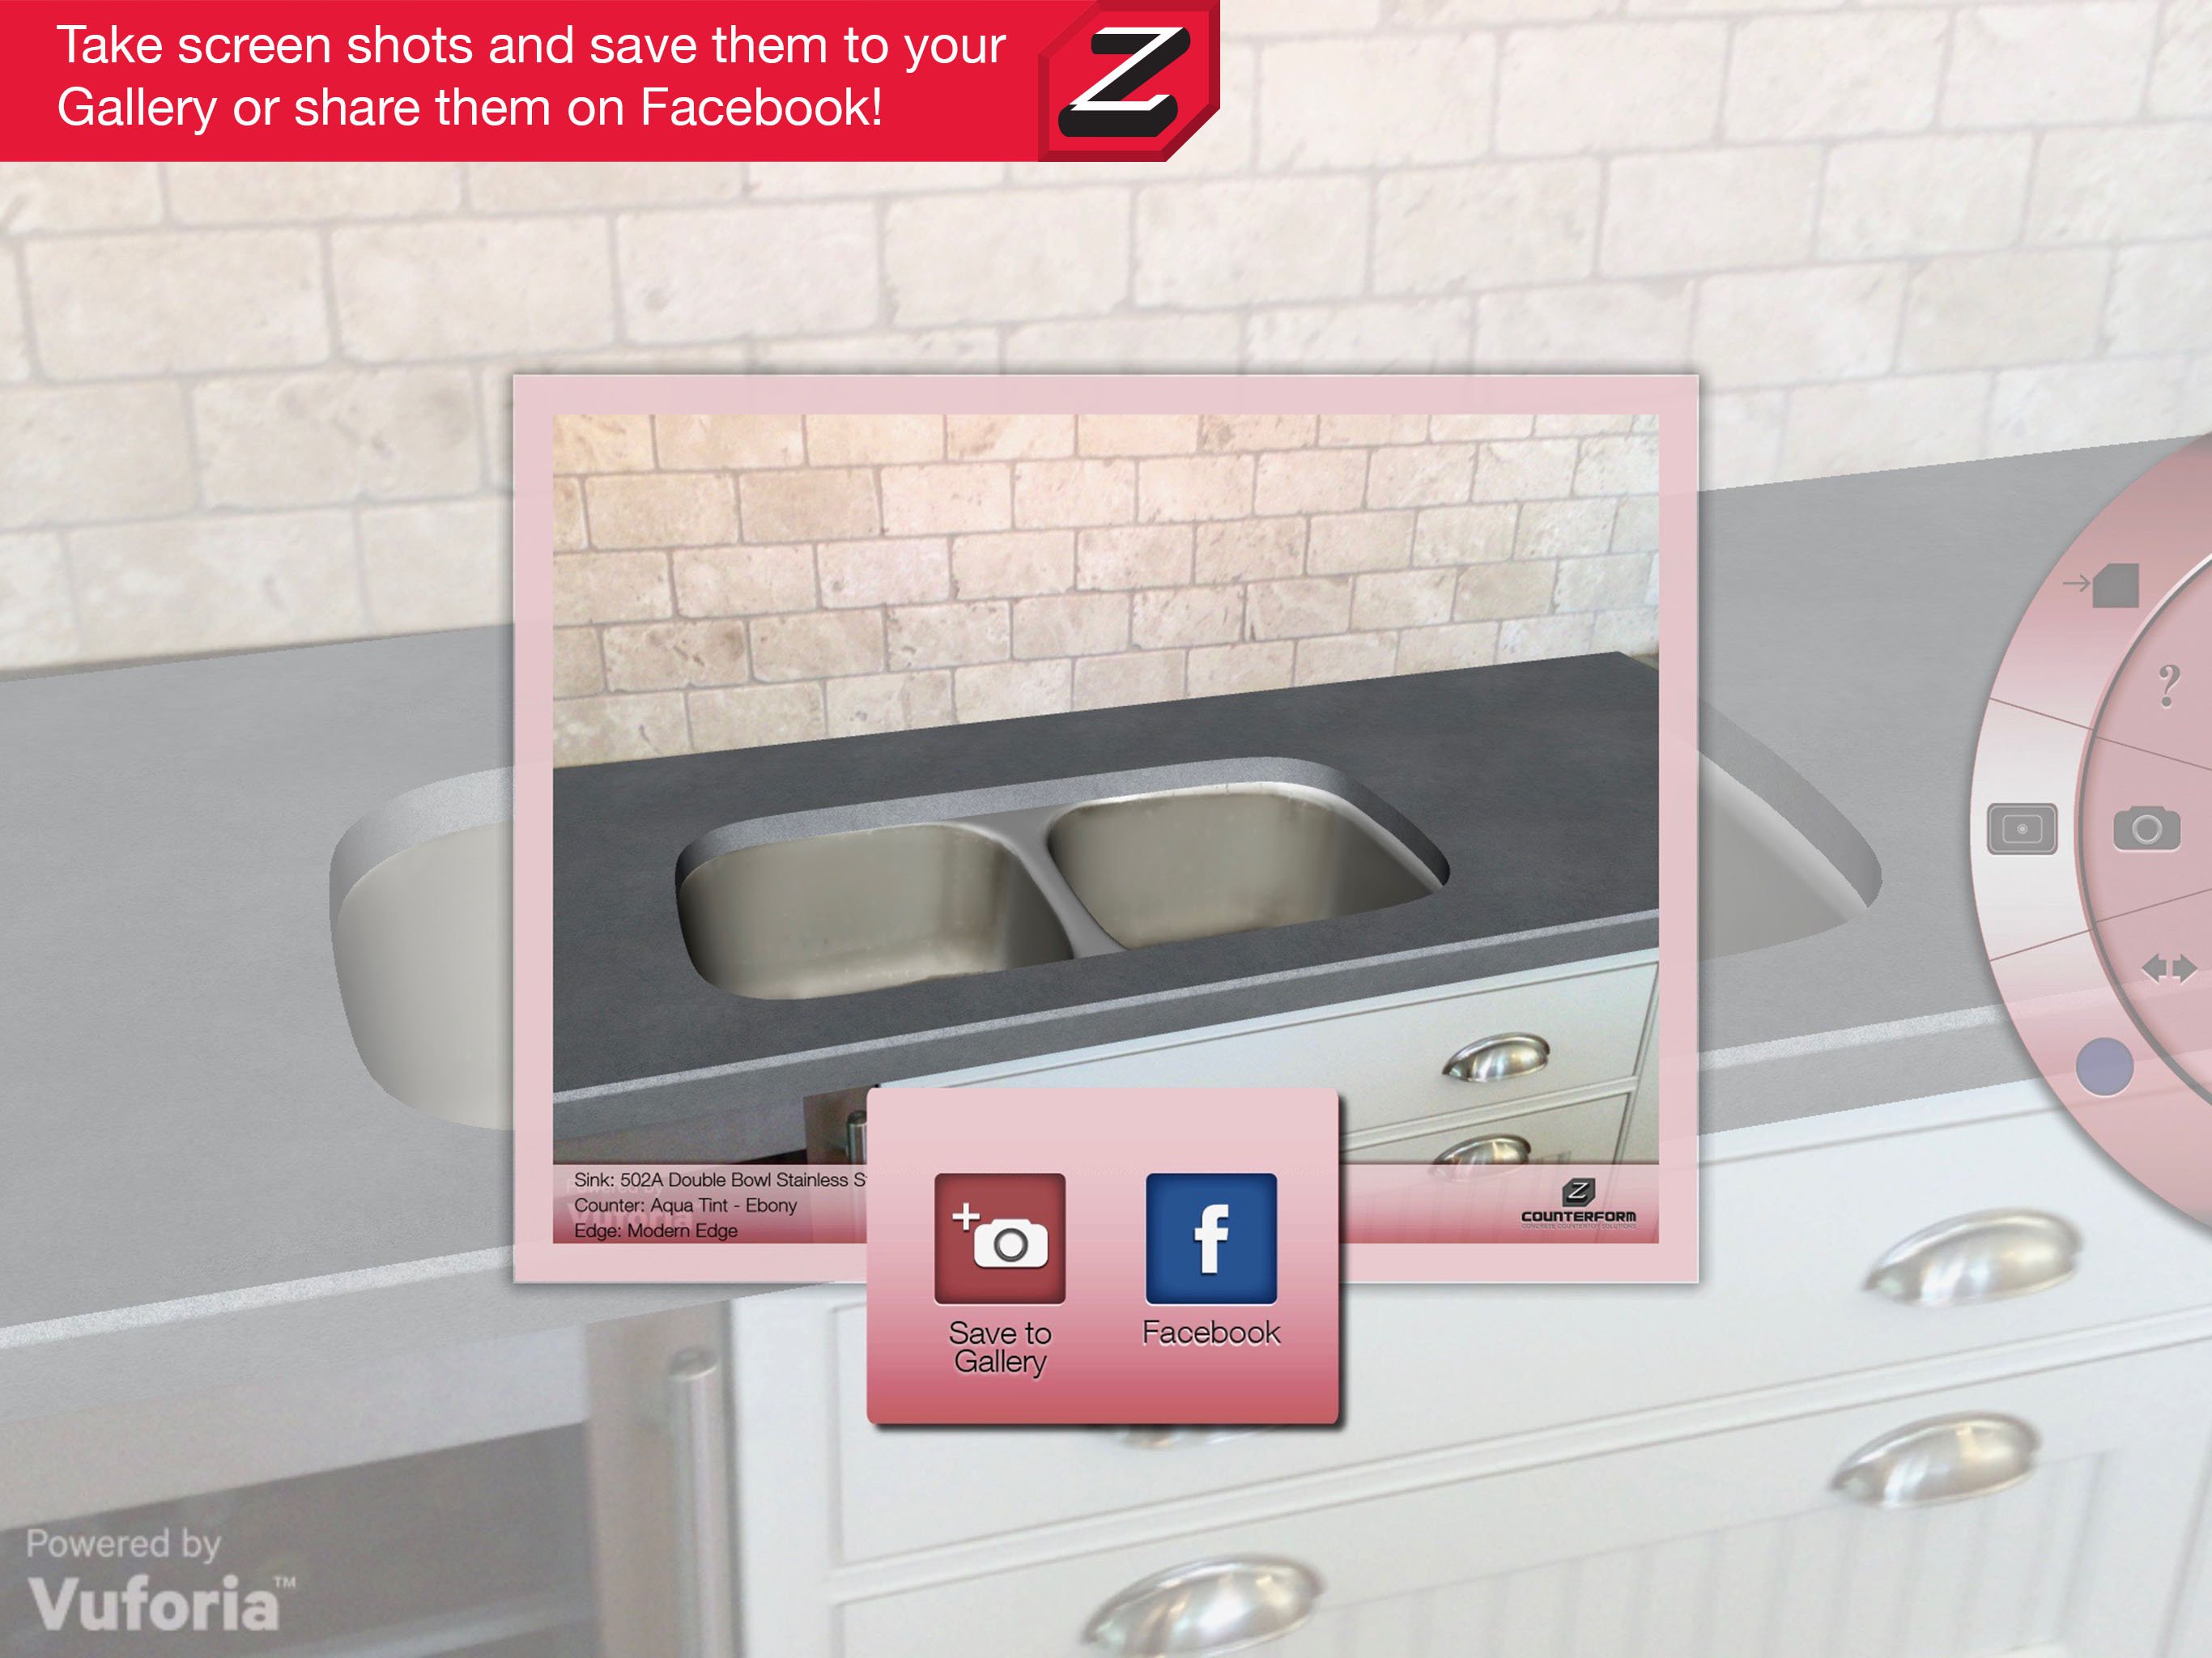 Once the Z Counterform Visualizer App is downloaded to your iPad or Tablet from the App store or Google Play Store, you simply print out the app target, align the target on the front edge of your existing countertop, point camera at target, and watch your countertops come to life.